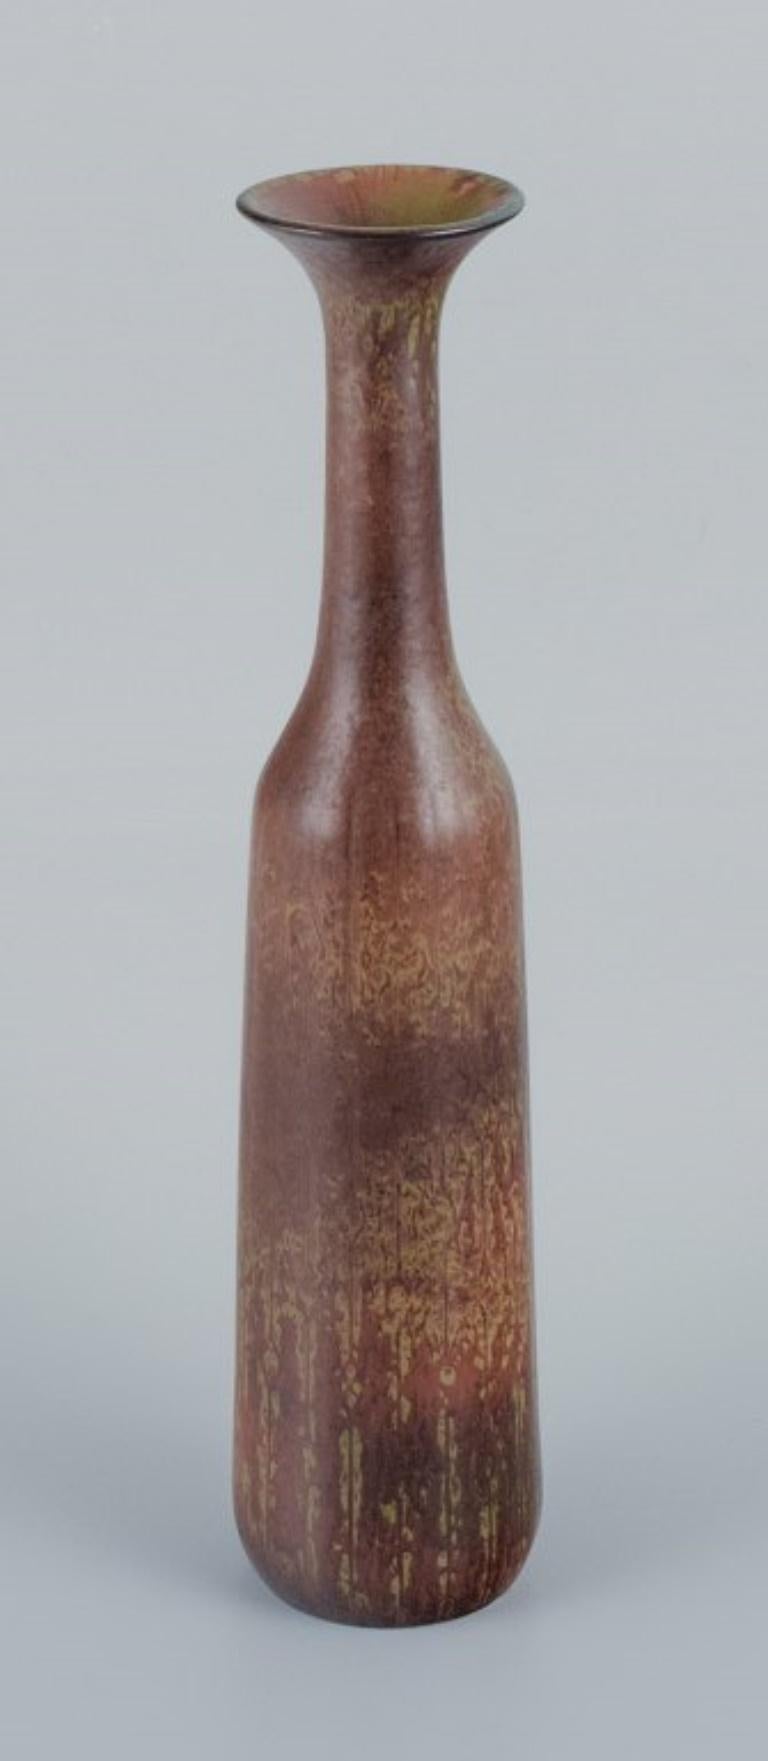 Gunnar Nylund for Rörstrand, large ceramic vase with mottled glaze in brown tones.
Mid-20th century.
In excellent condition.
Marked.
Second factory quality.
Dimensions: H 34.0 x D 8.0 cm.